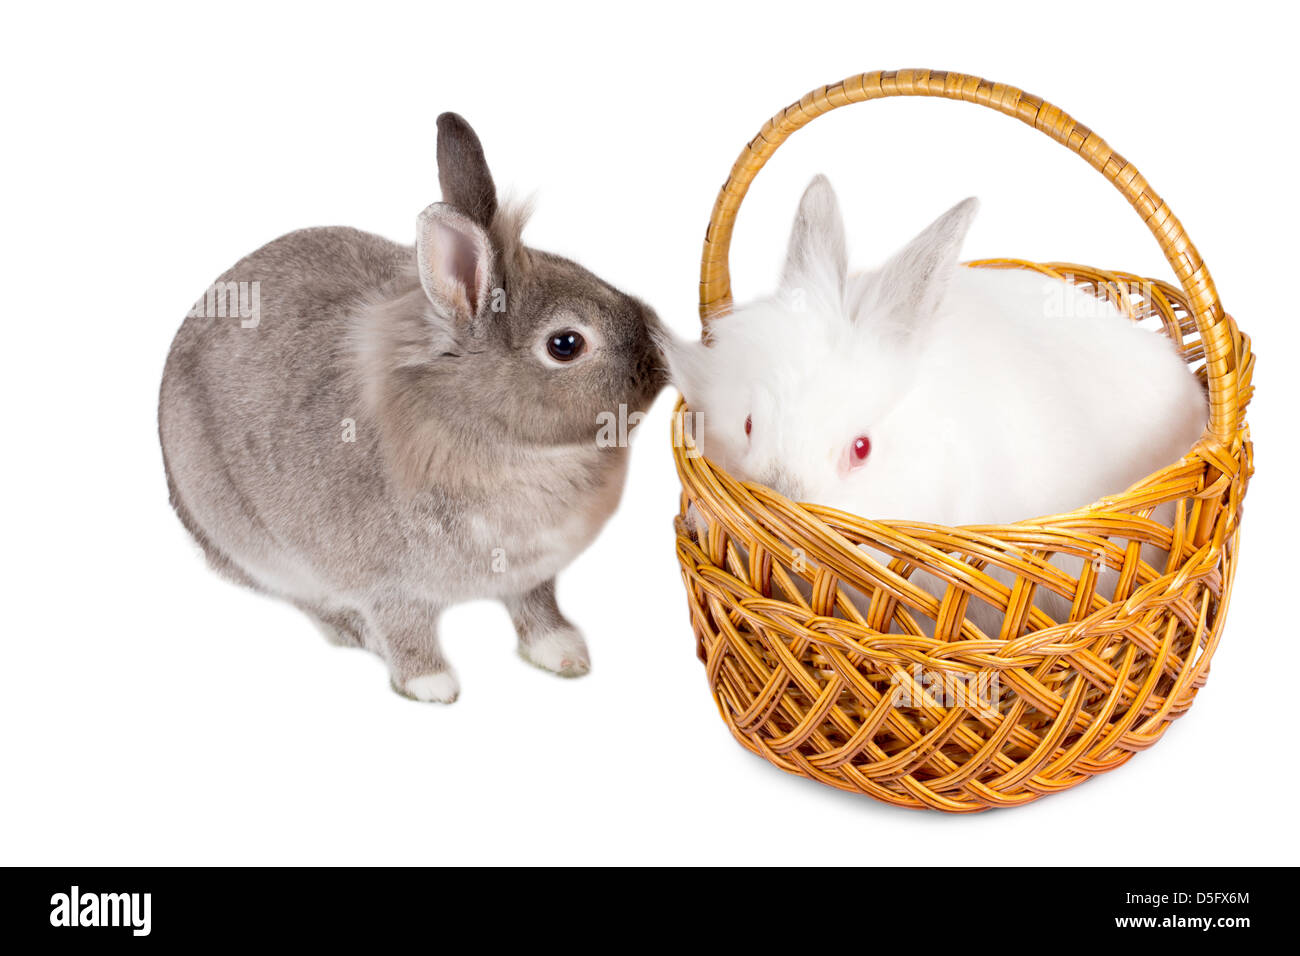 Two cute little rabbit friends, with the fluffy white one sitting in a wicker basket being investigated from the outside by a friendly little grey cottontail isolated on white. Stock Photo